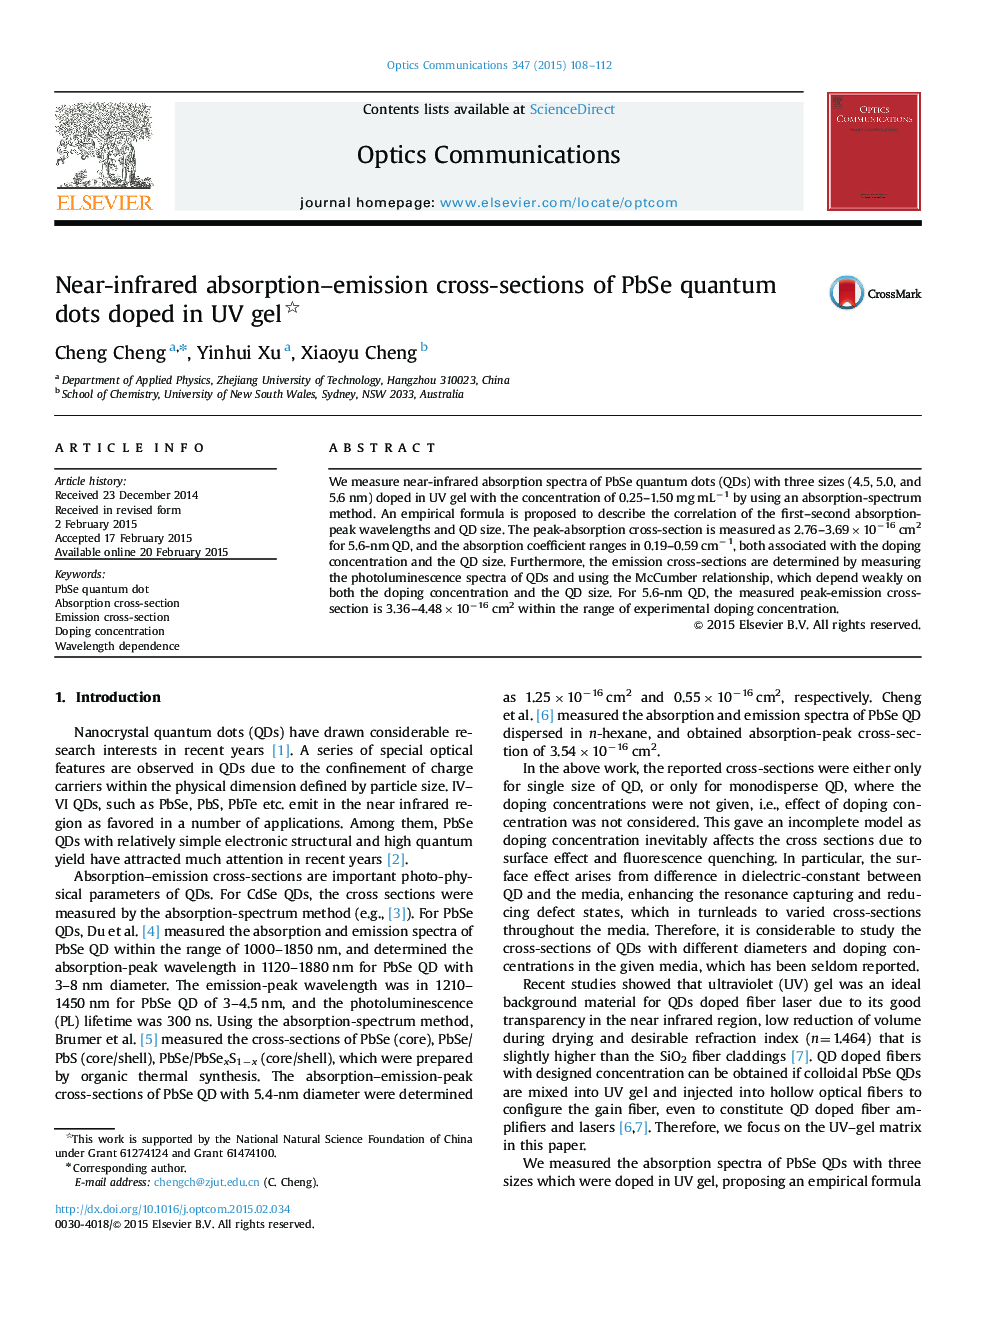 Near-infrared absorption-emission cross-sections of PbSe quantum dots doped in UV gel